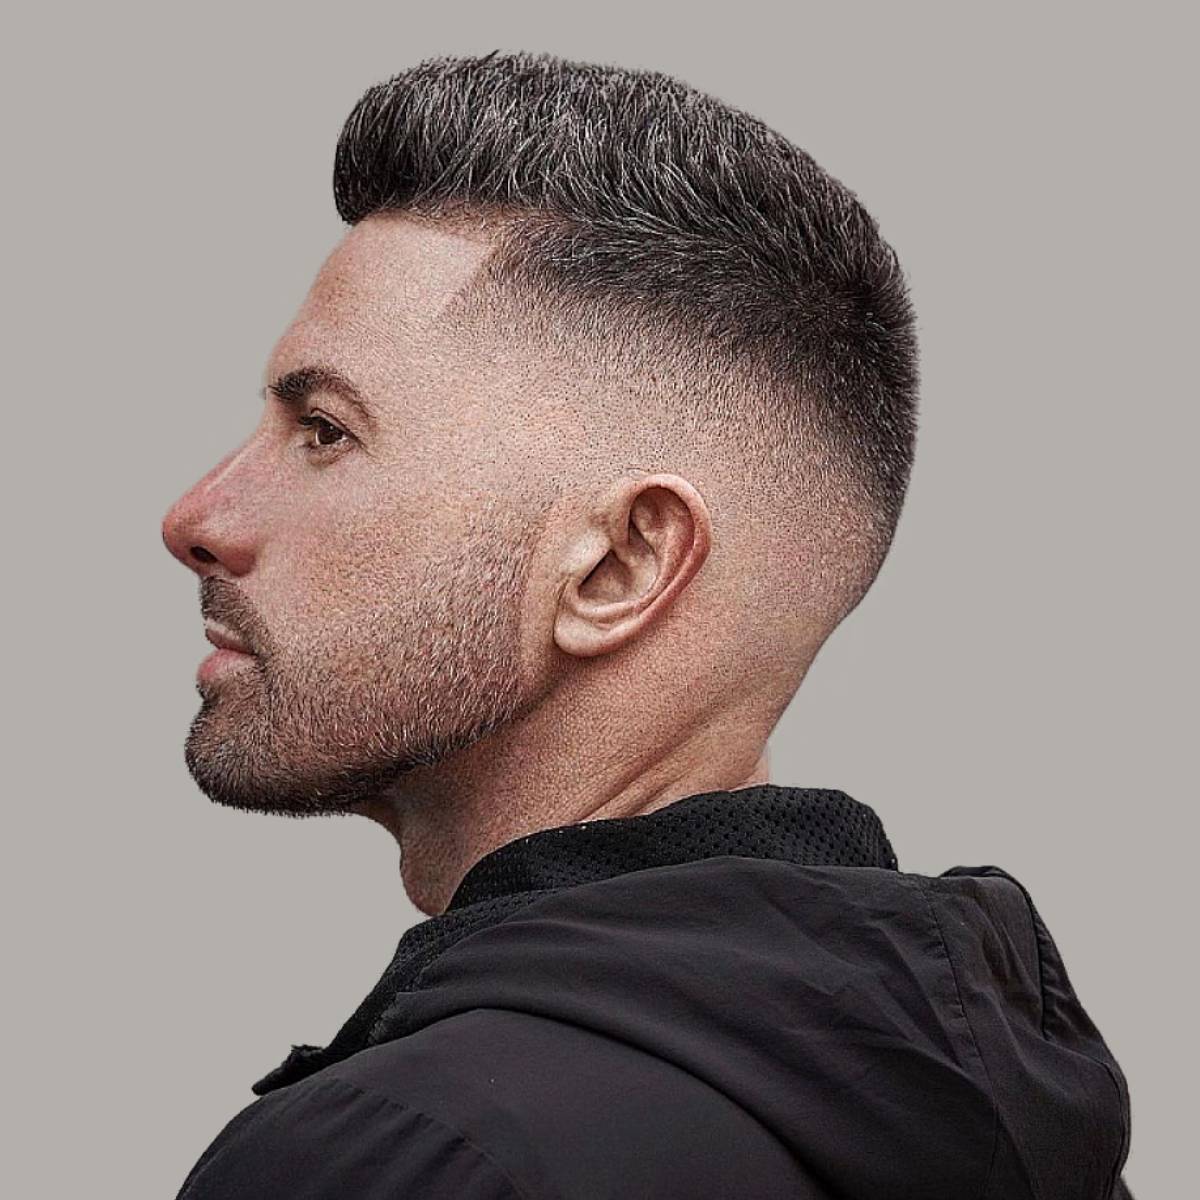 Top 11 best hairstyles for men in India (2023) - According to face shape,  hair texture and length of hair